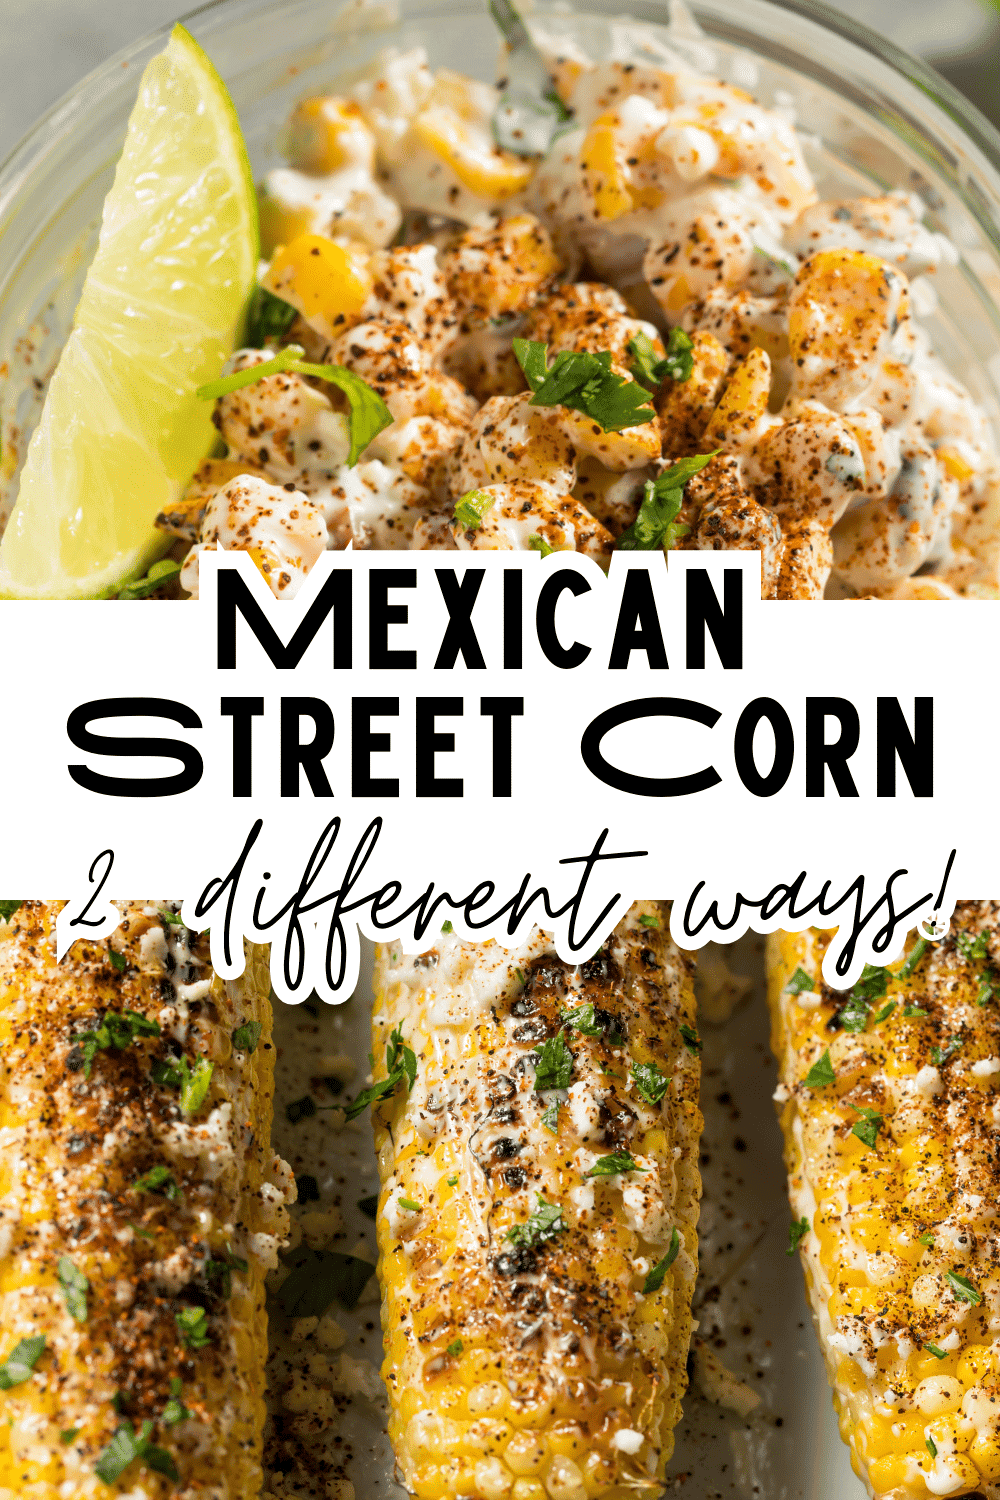 Mexican Street Corn Recipe Two Ways - text over 2 different images of Mexican corn in a cup and traditional Mexican street corn on cob